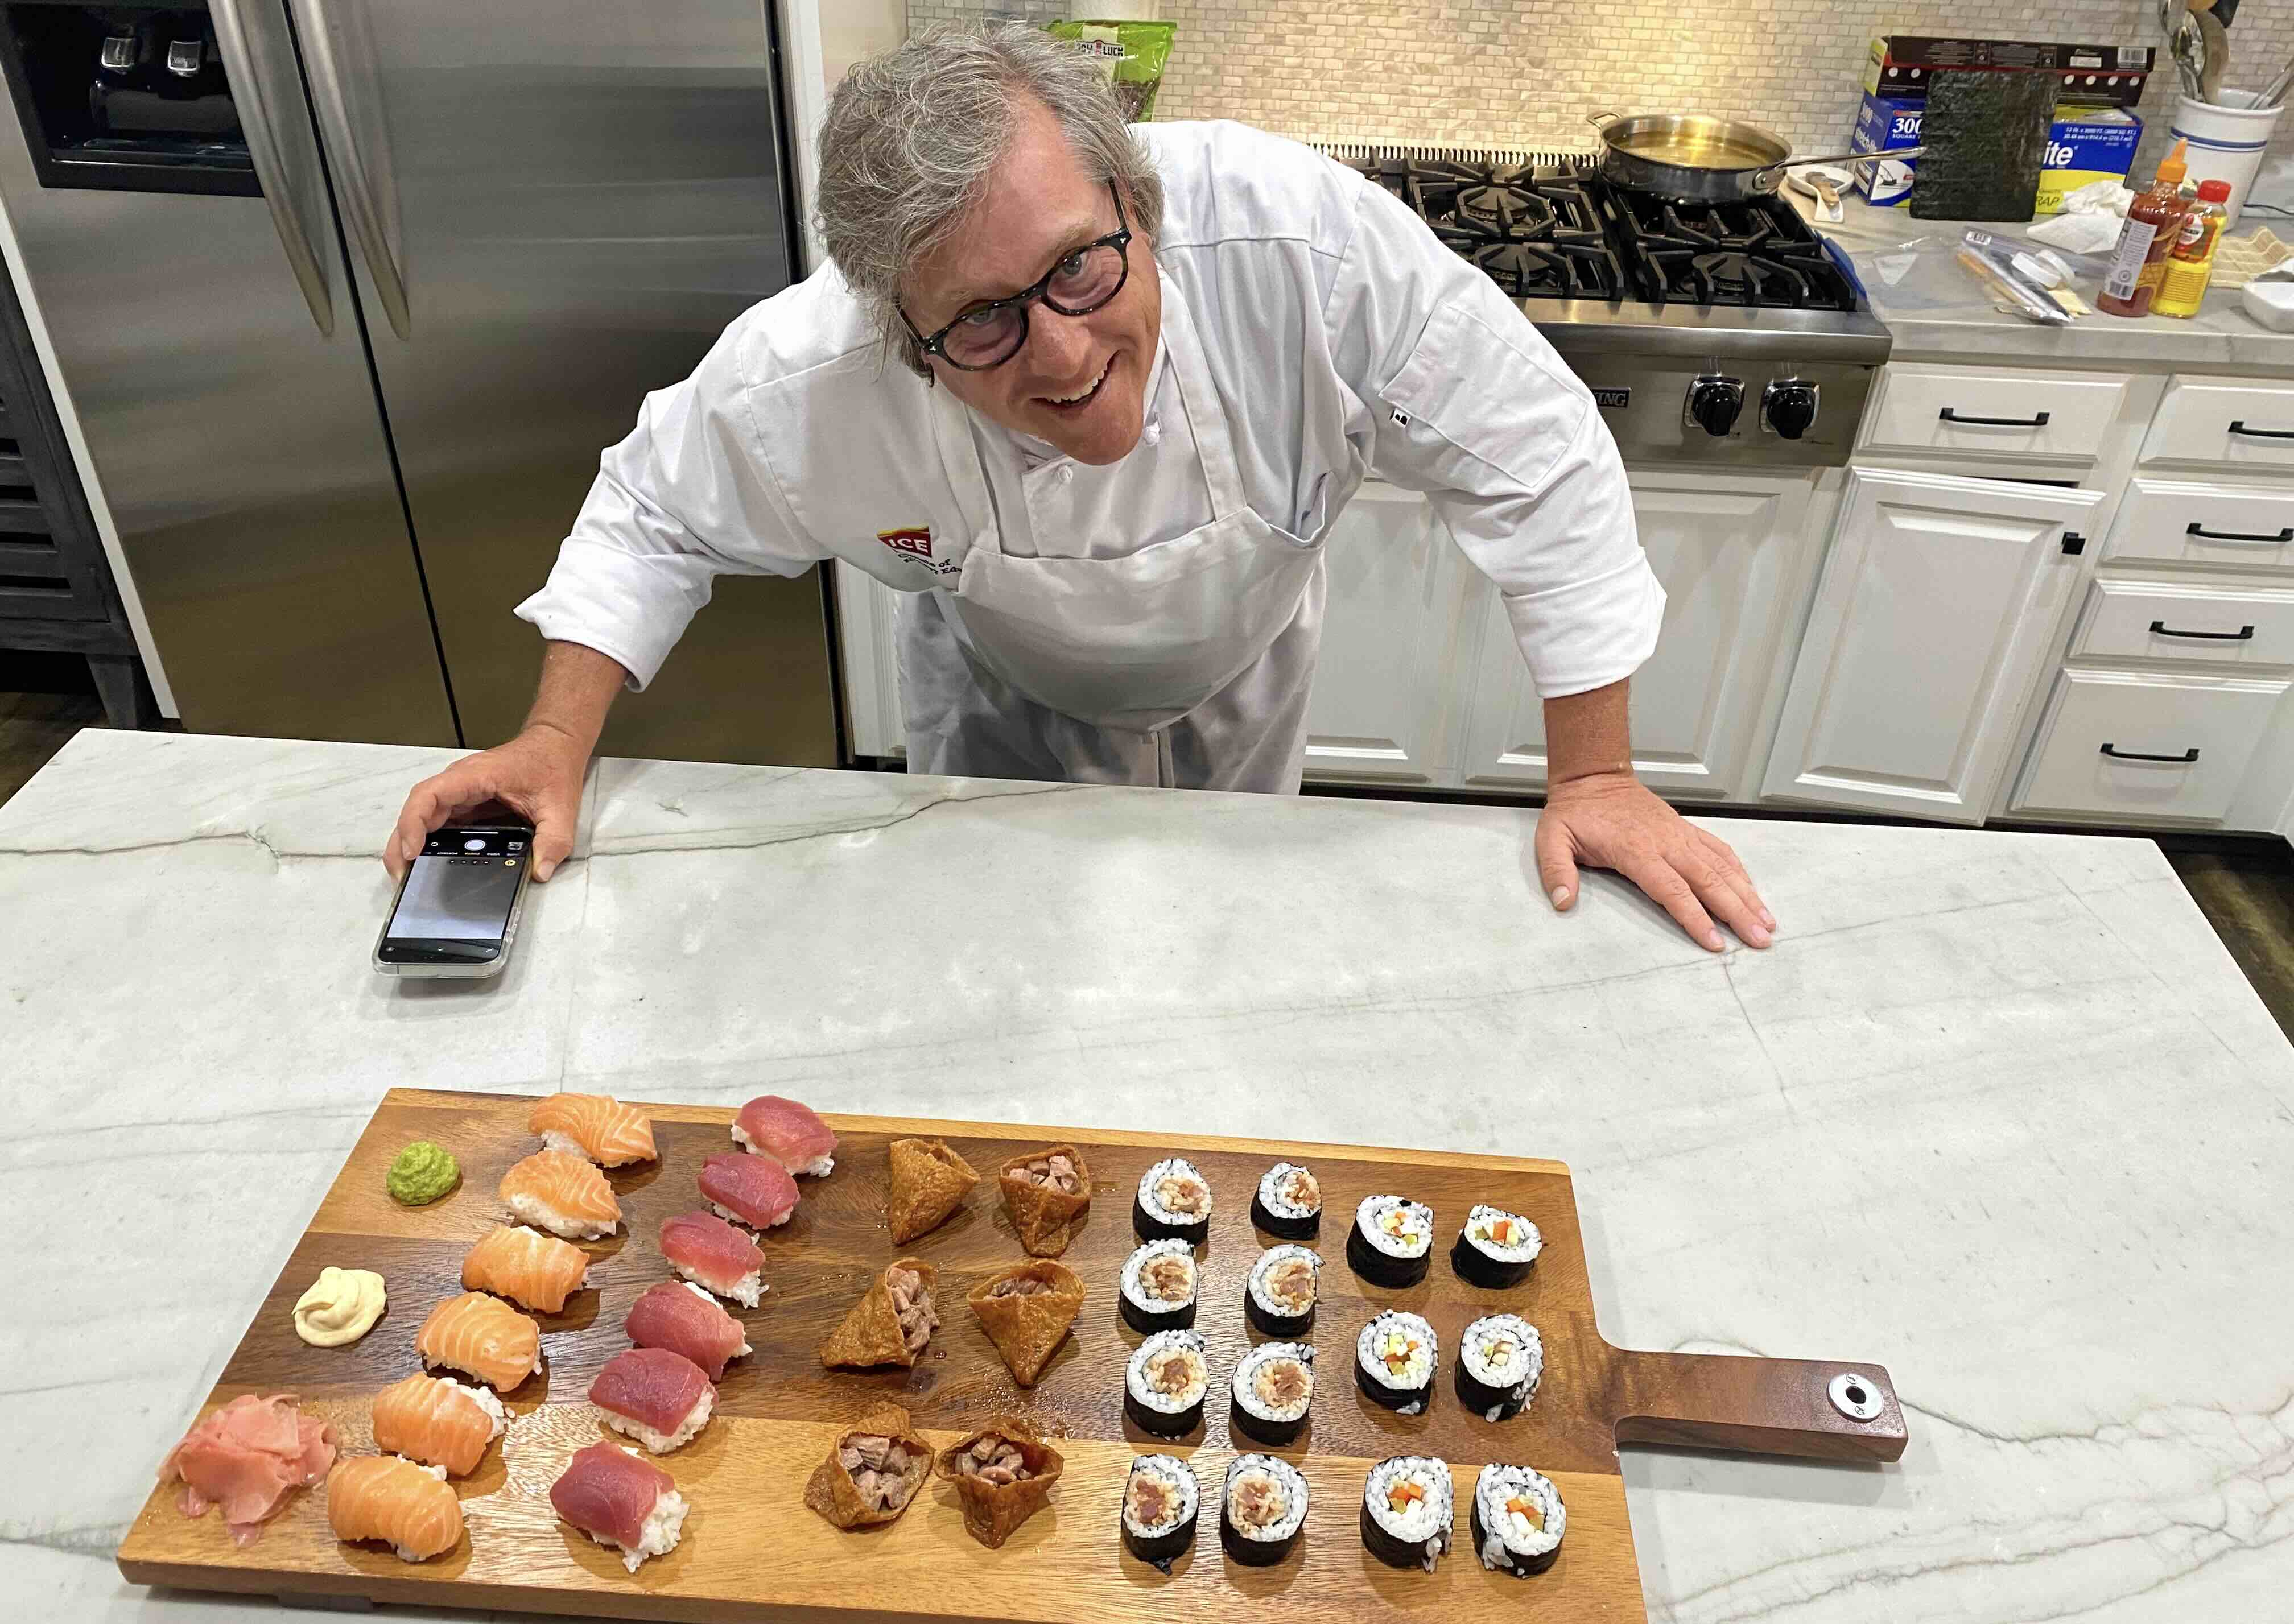 ICE online culinary school graduate Jason Sims smiles with a board of prepared sushi